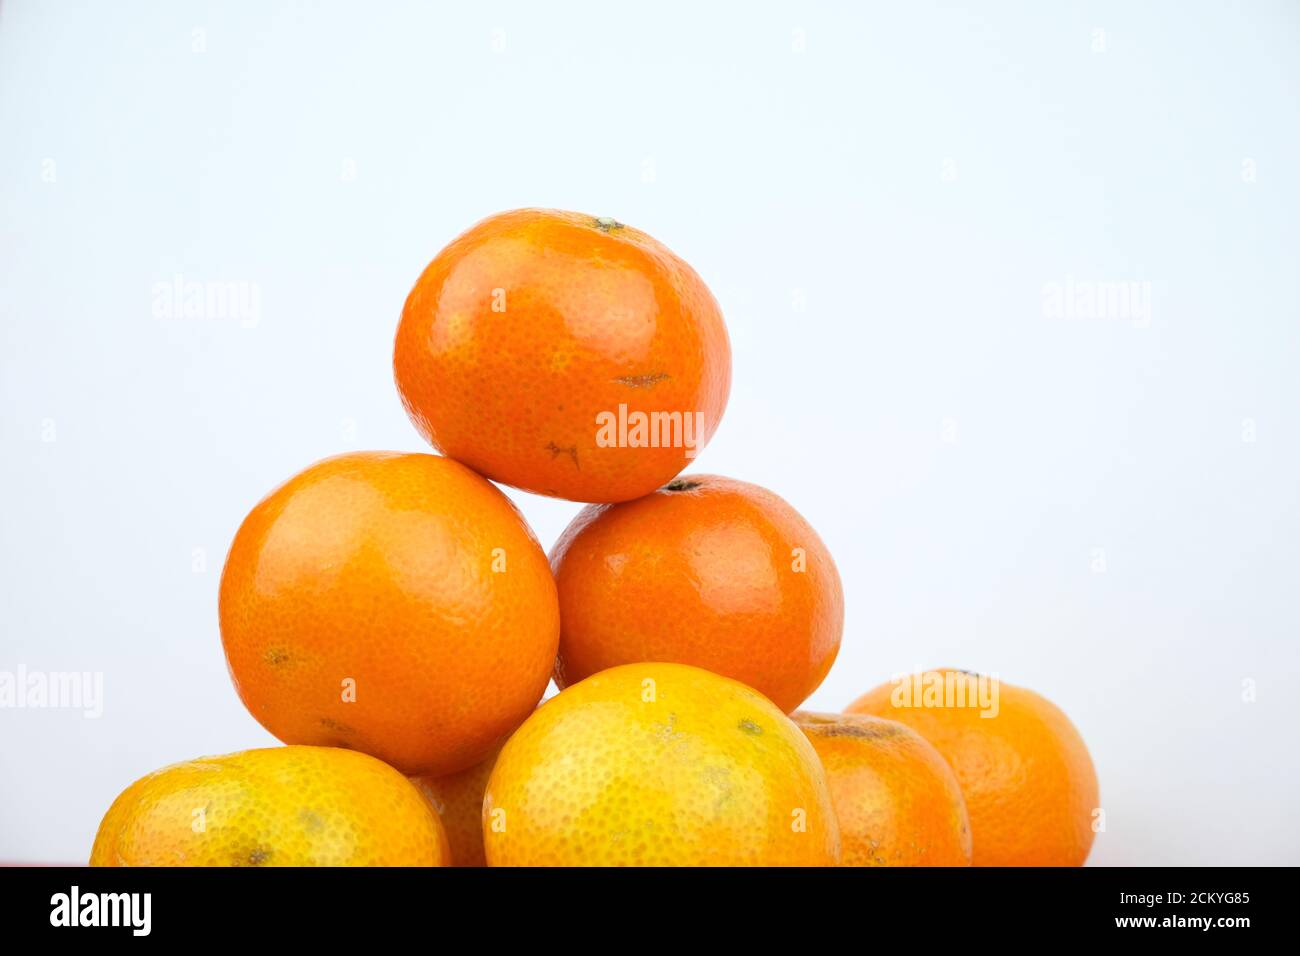 Arranged pile of ripe orange clementines isolated on a white background Stock Photo